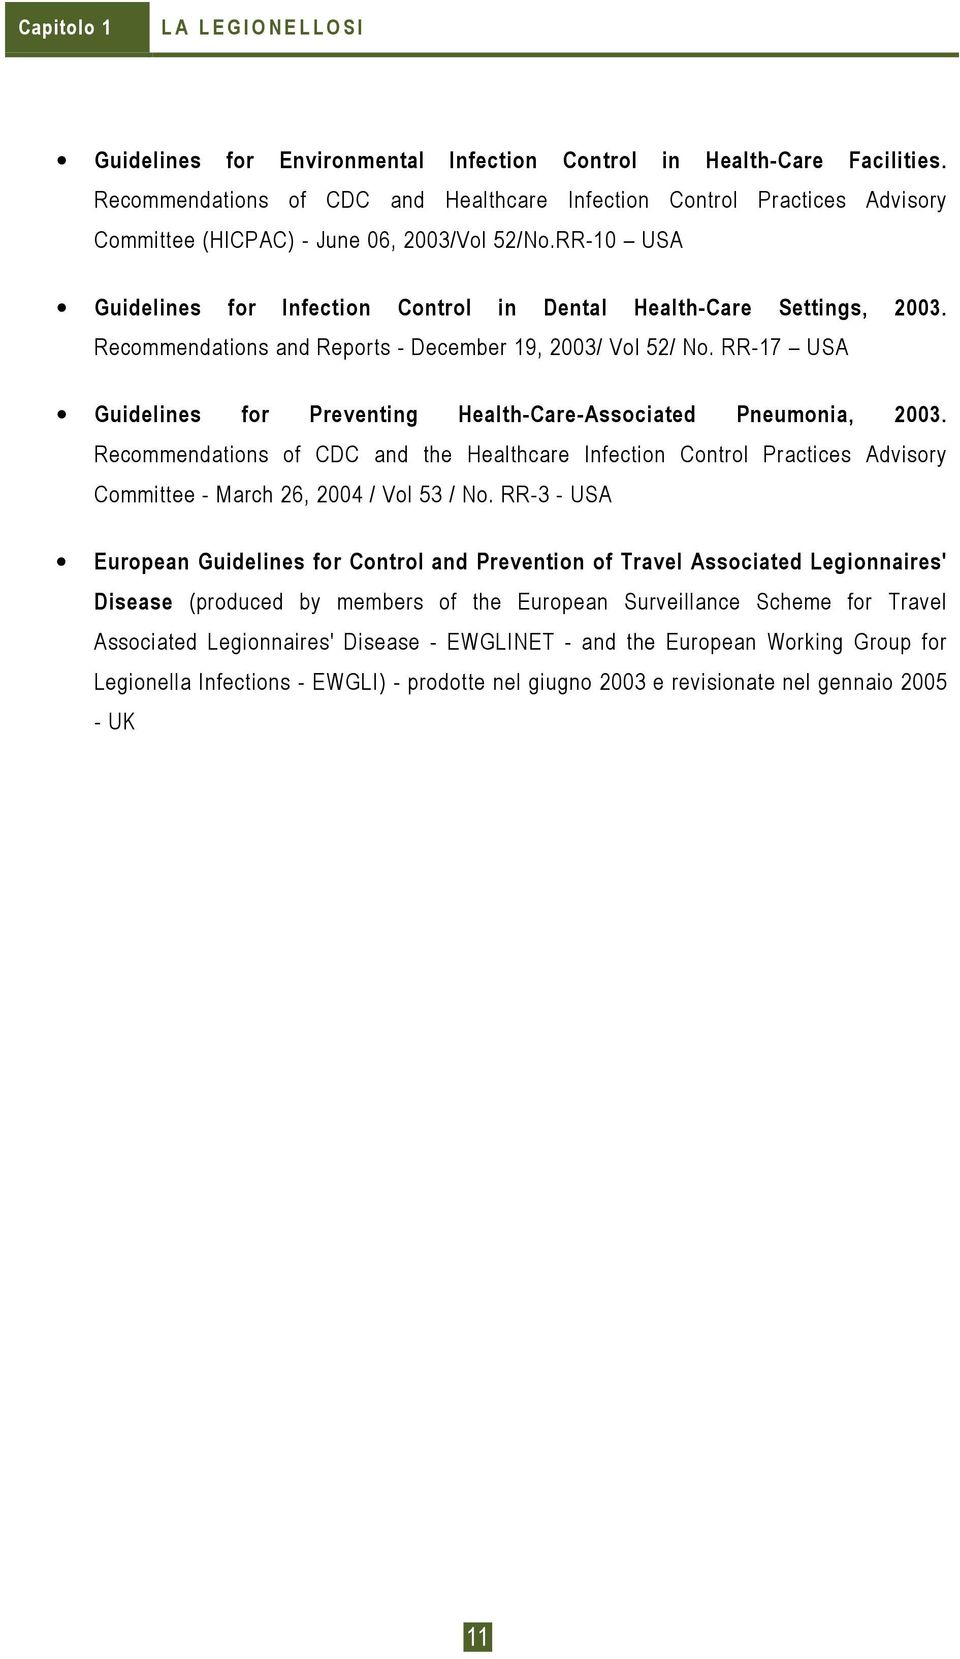 Recommendations and Reports - December 19, 2003/ Vol 52/ No. RR-17 USA Guidelines for Preventing Health-Care-Associated Pneumonia, 2003.